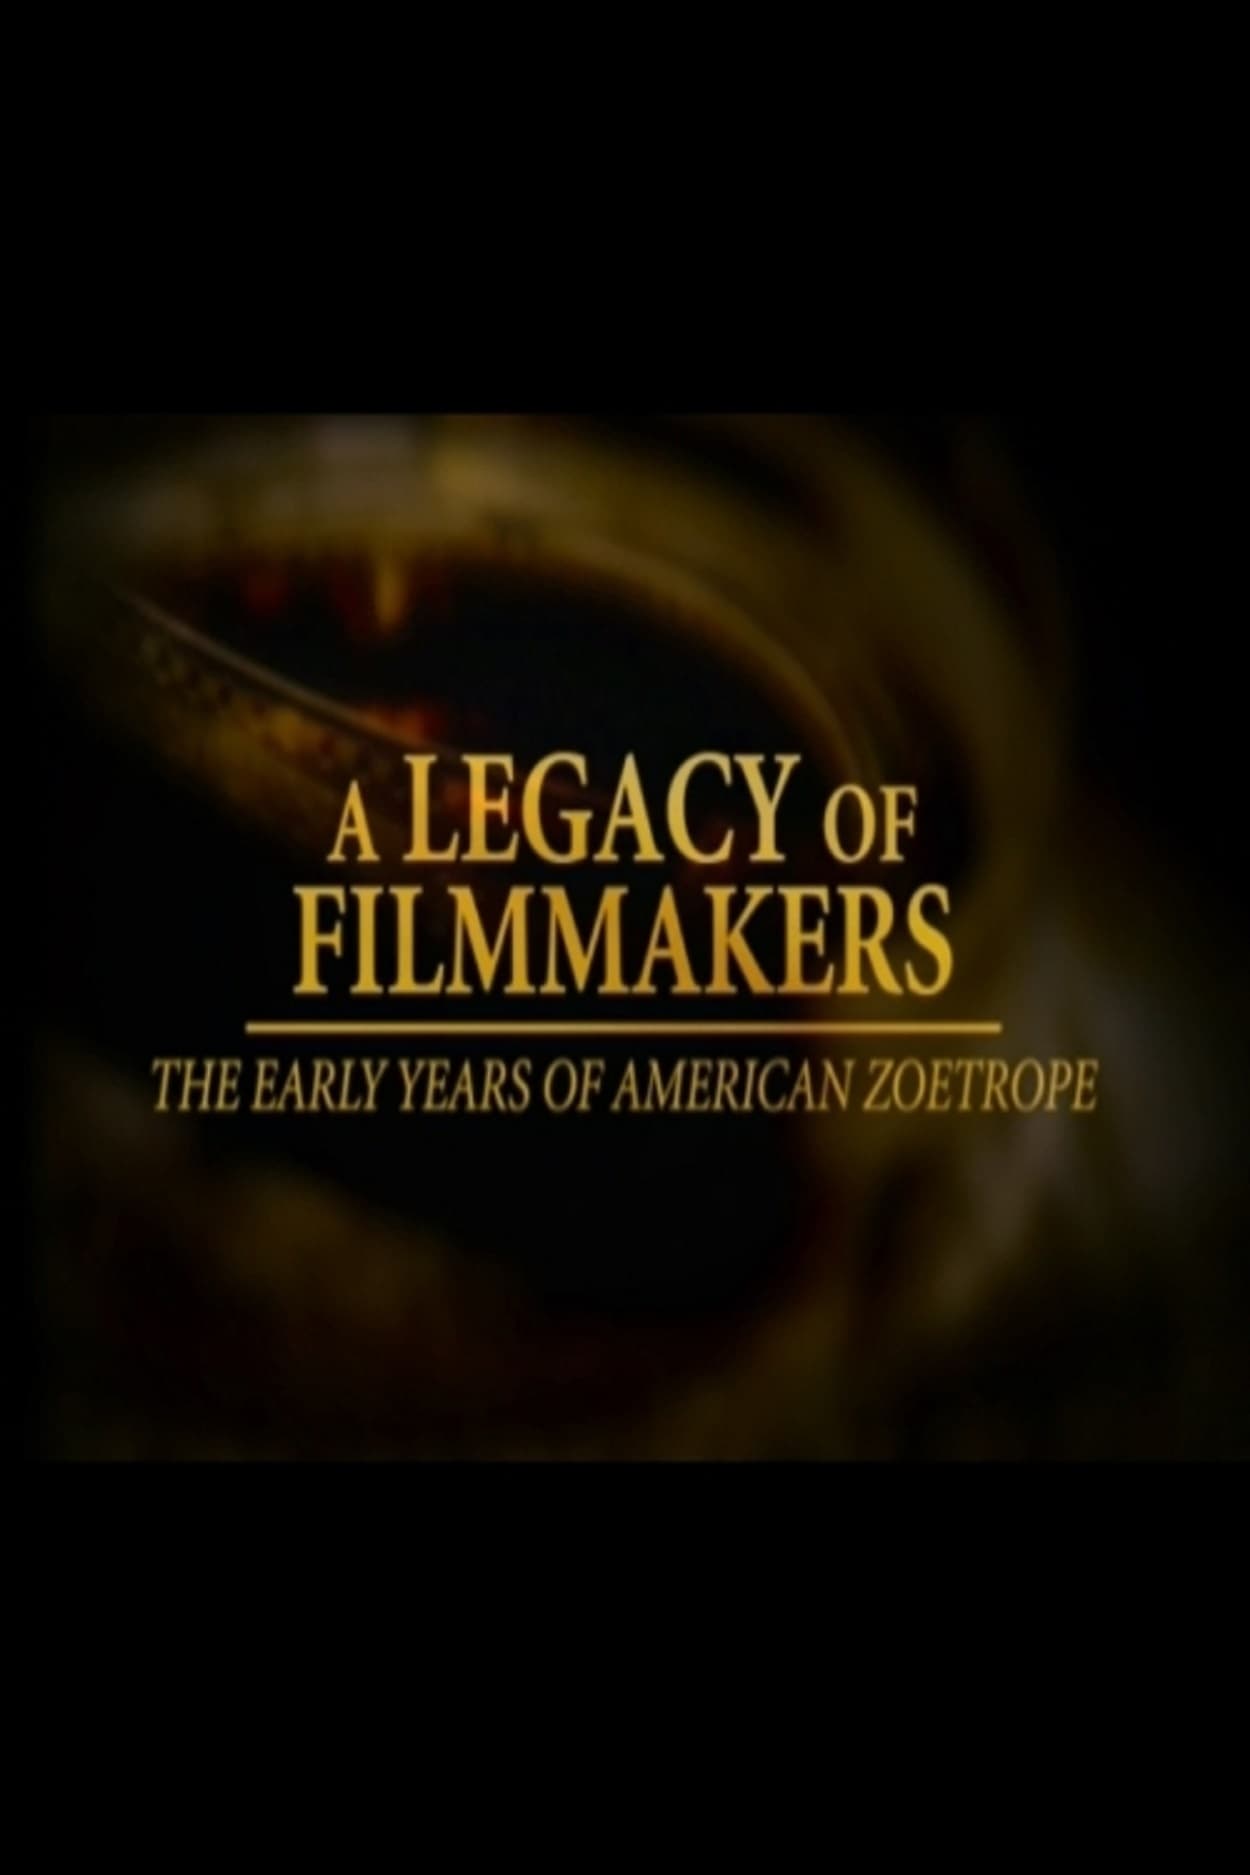 A Legacy of Filmmakers: The Early Years of American Zoetrope (2004)